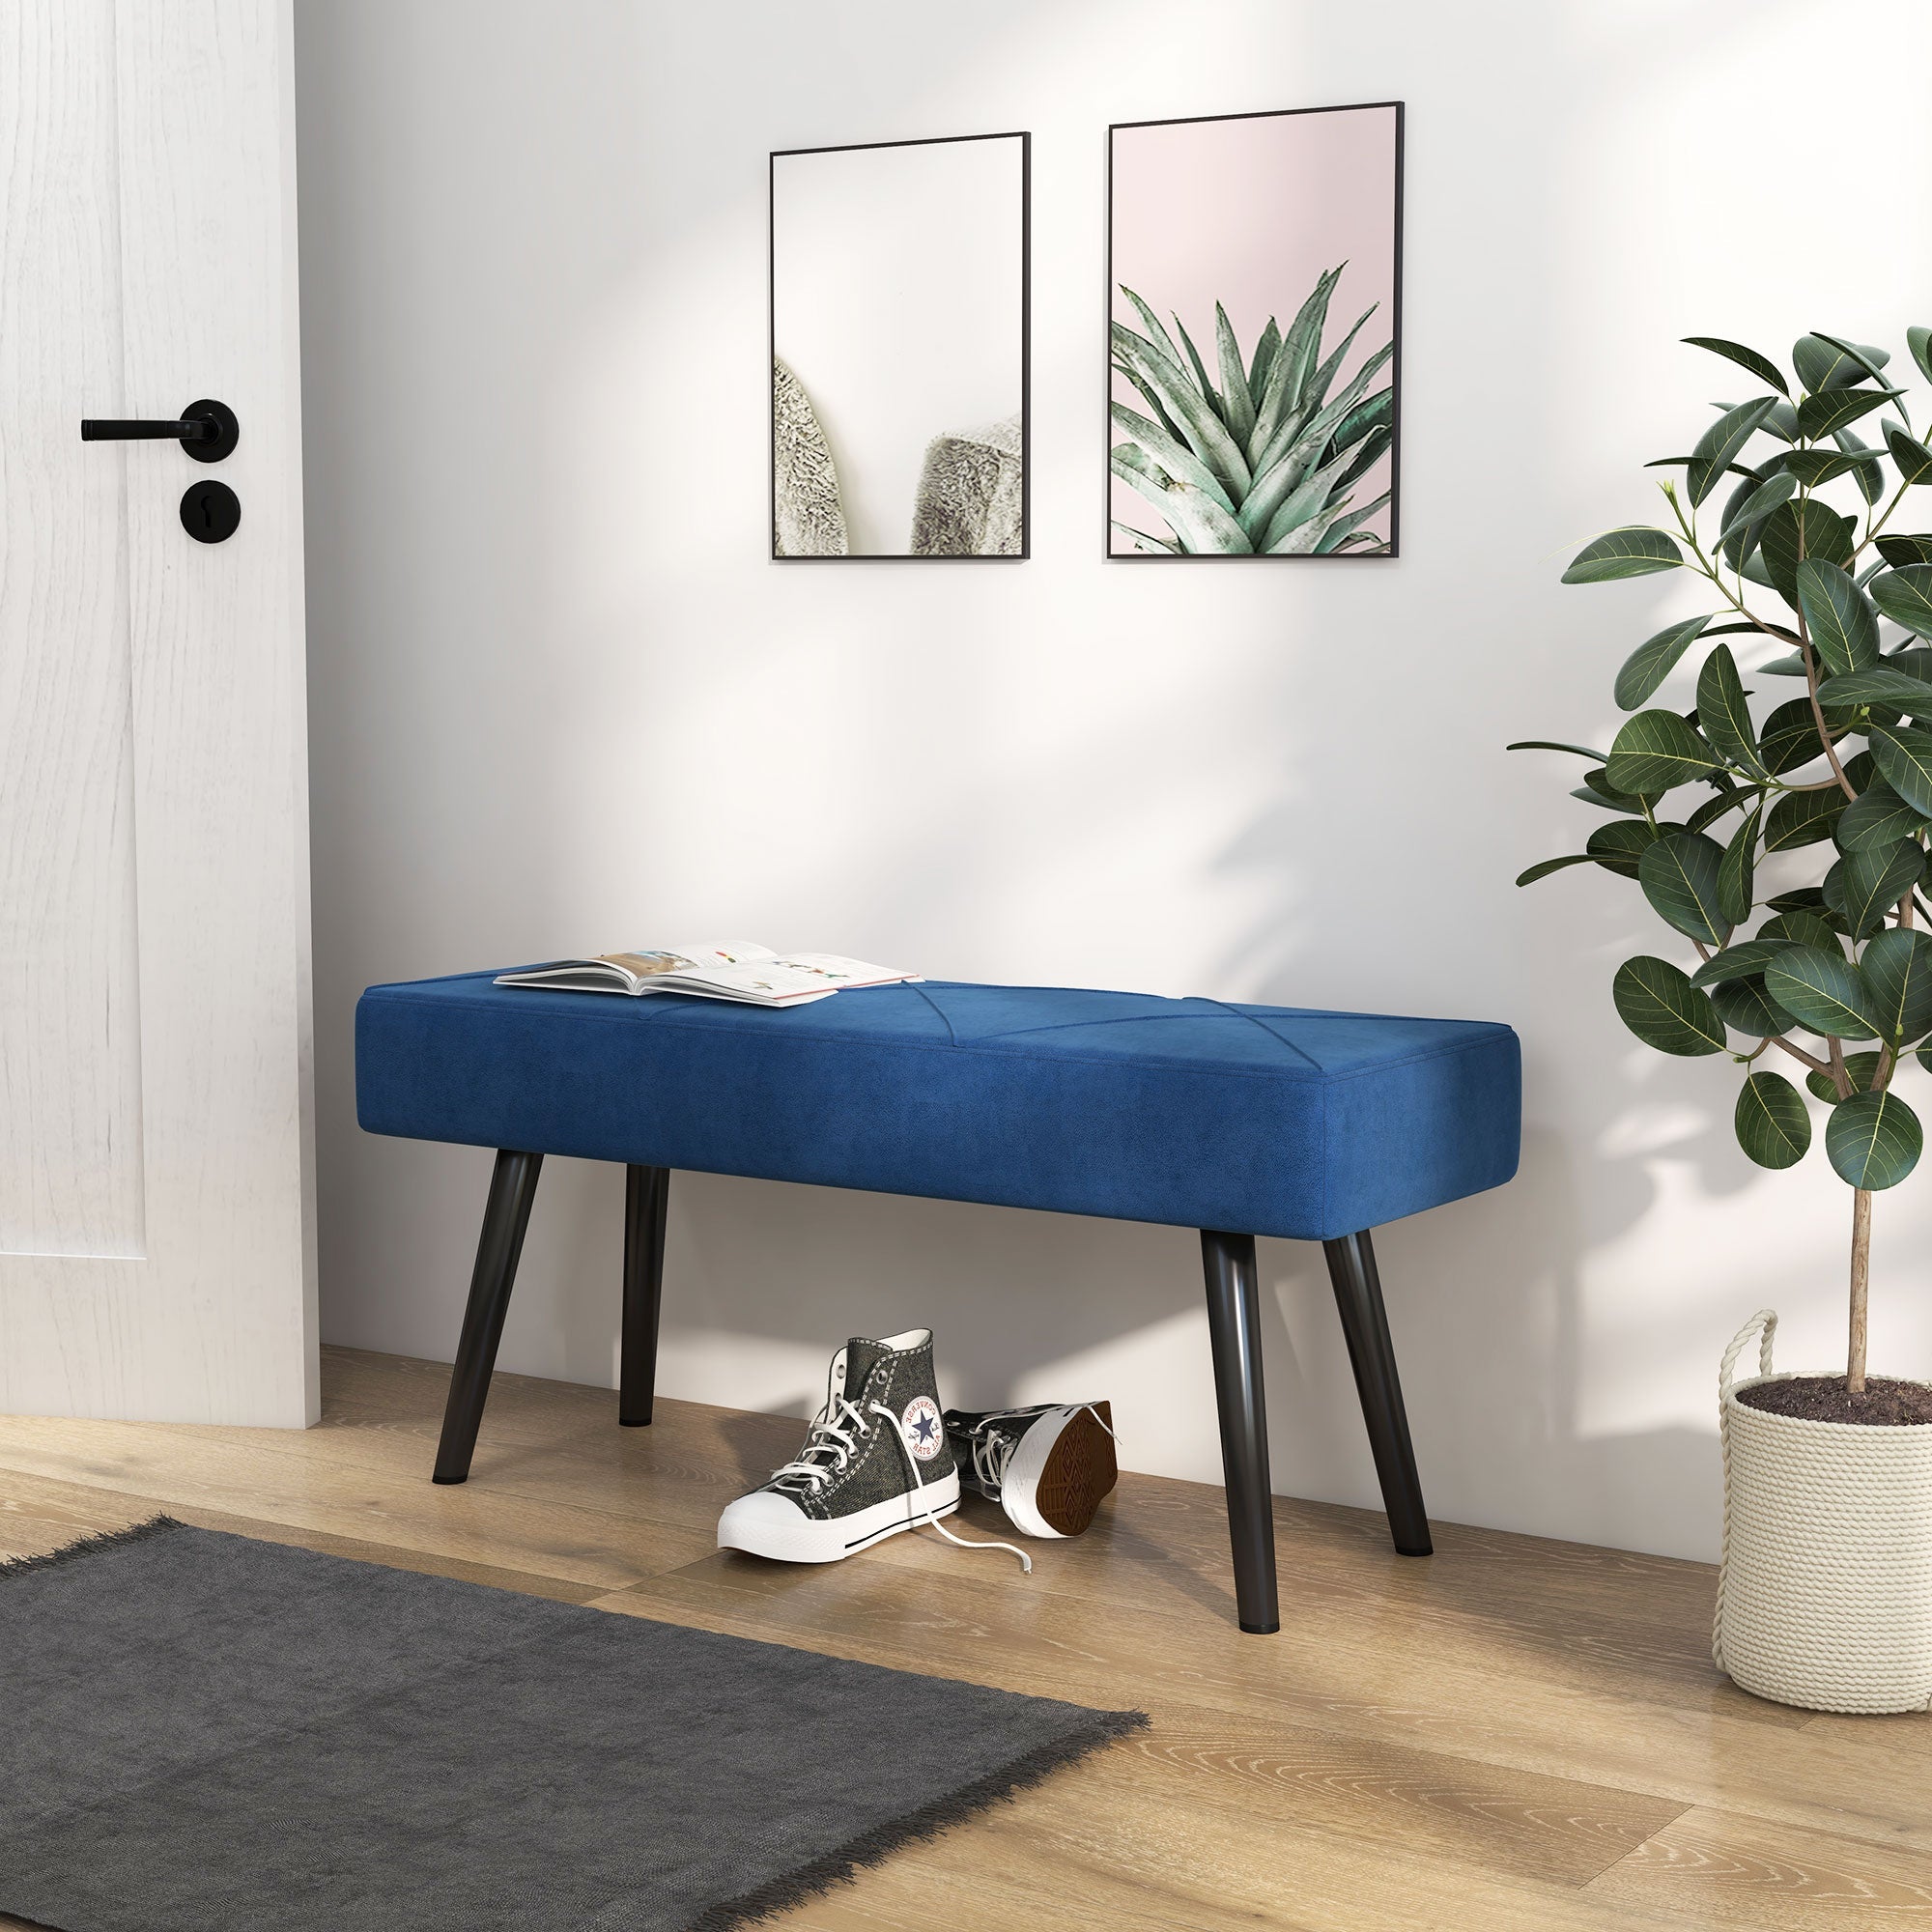 HOMCOM Upholstered Bedroom Bench with X-Shape Steel Legs, Elegant Hallway Bench for End of Bed, Blue - TovaHaus